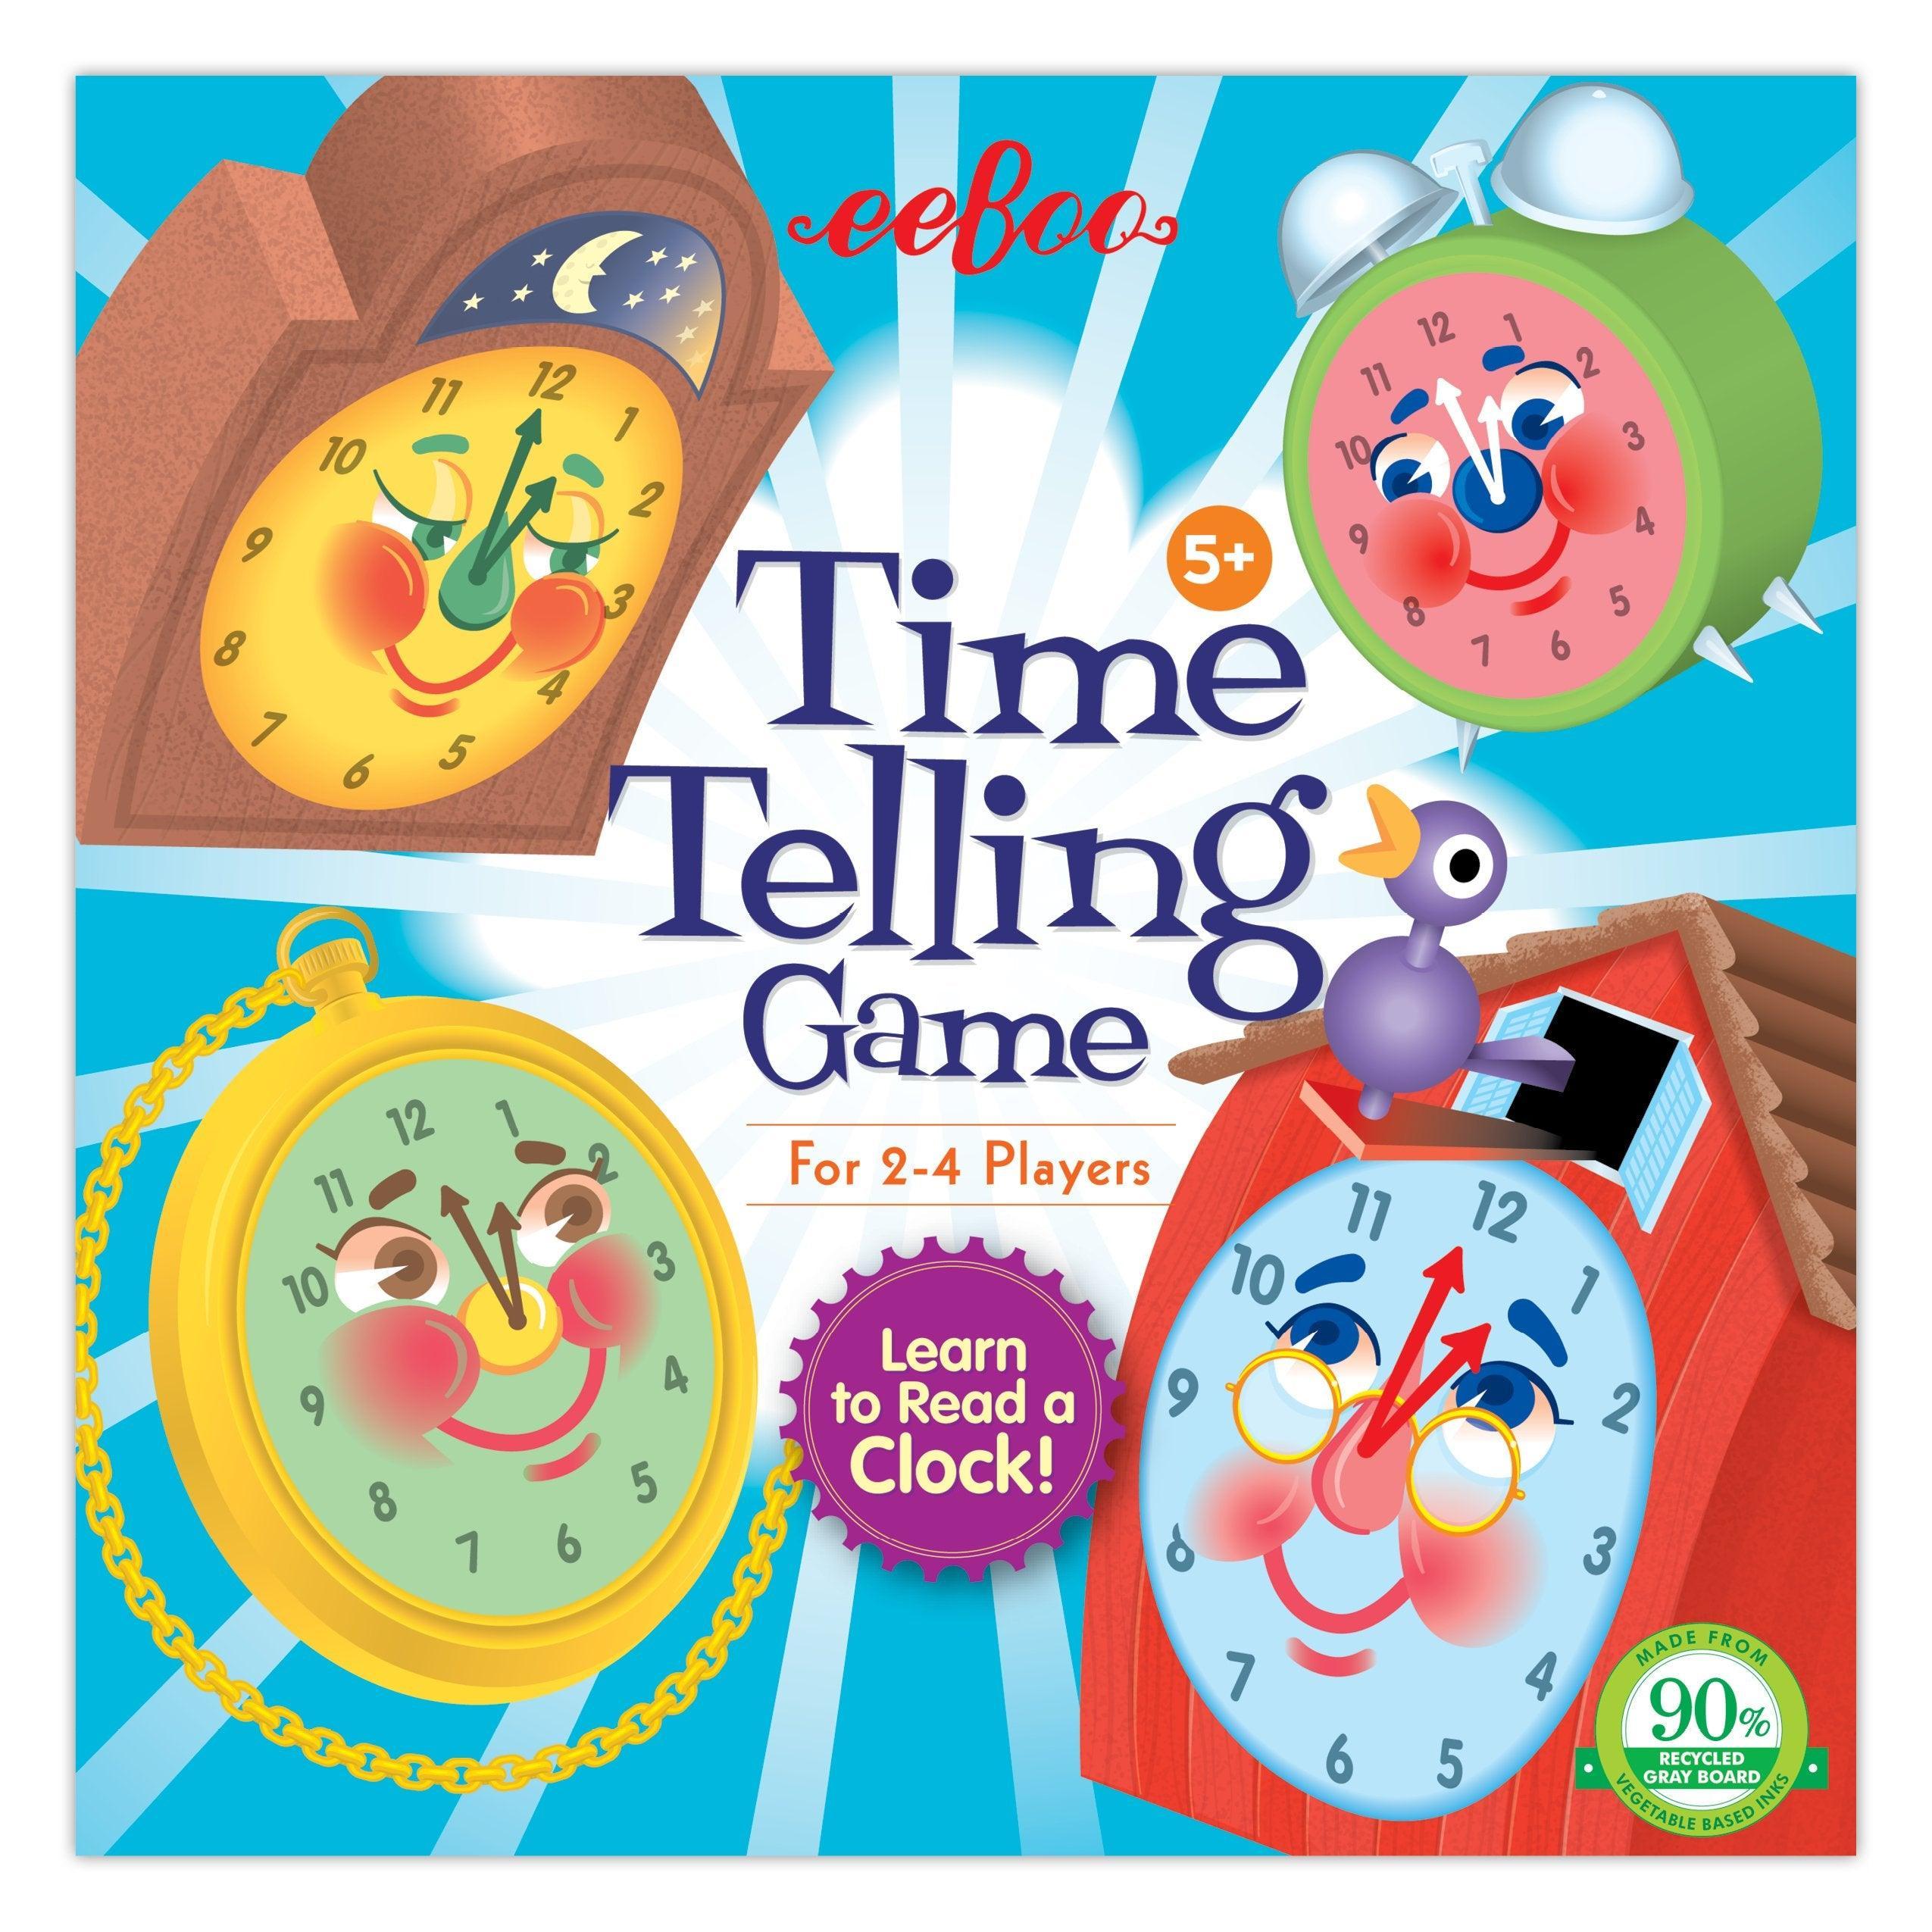 Time Telling Game - Why and Whale